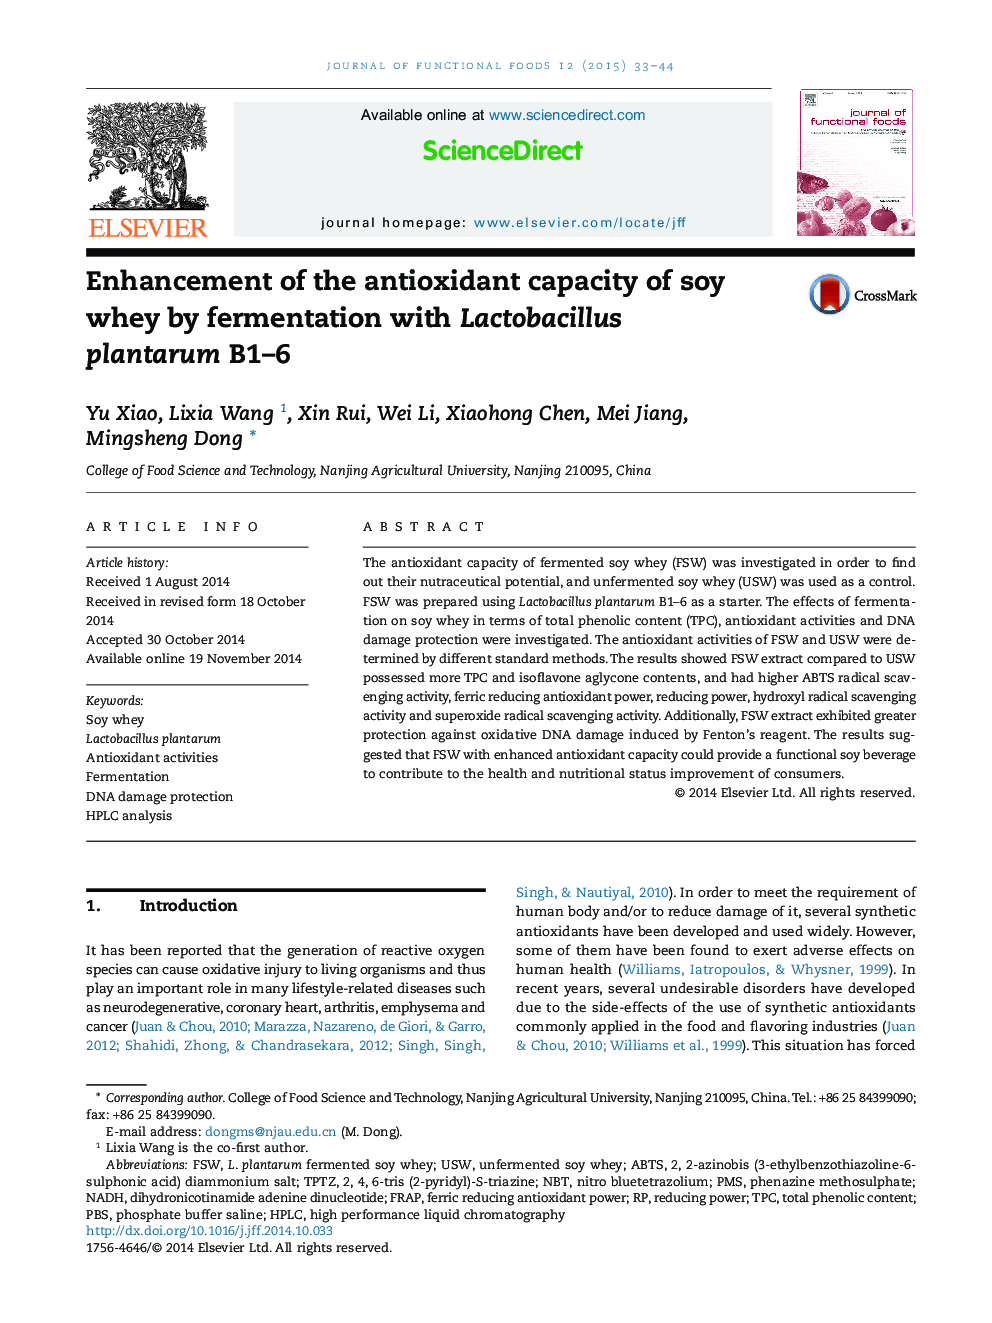 Enhancement of the antioxidant capacity of soy whey by fermentation with Lactobacillus plantarum B1–6